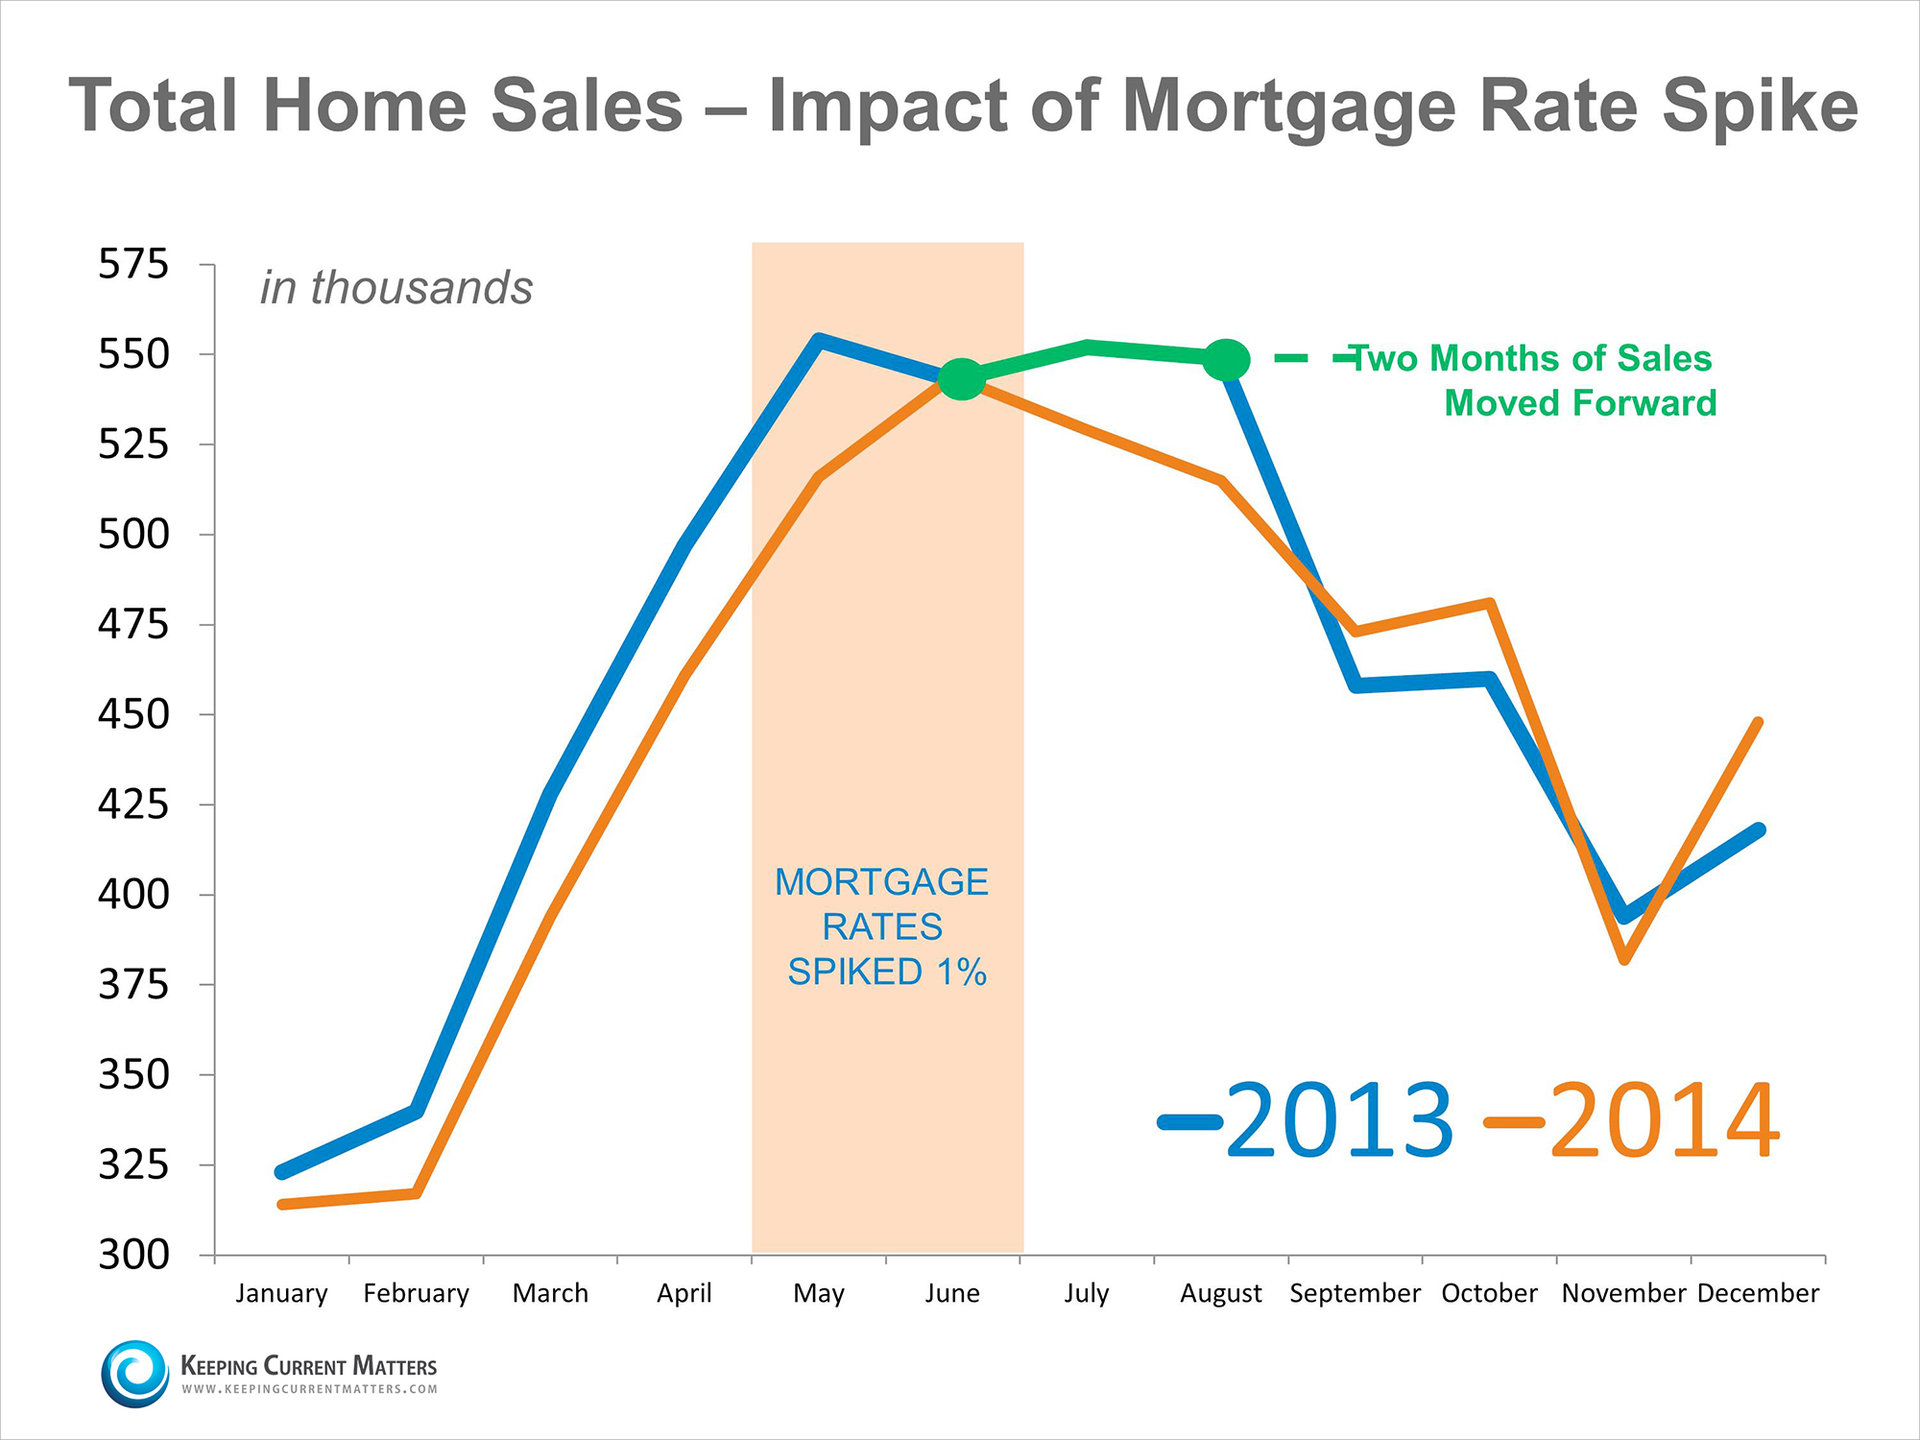 Home Sales & Impact of Mortgage Rate Spike | Keeping Current Matters